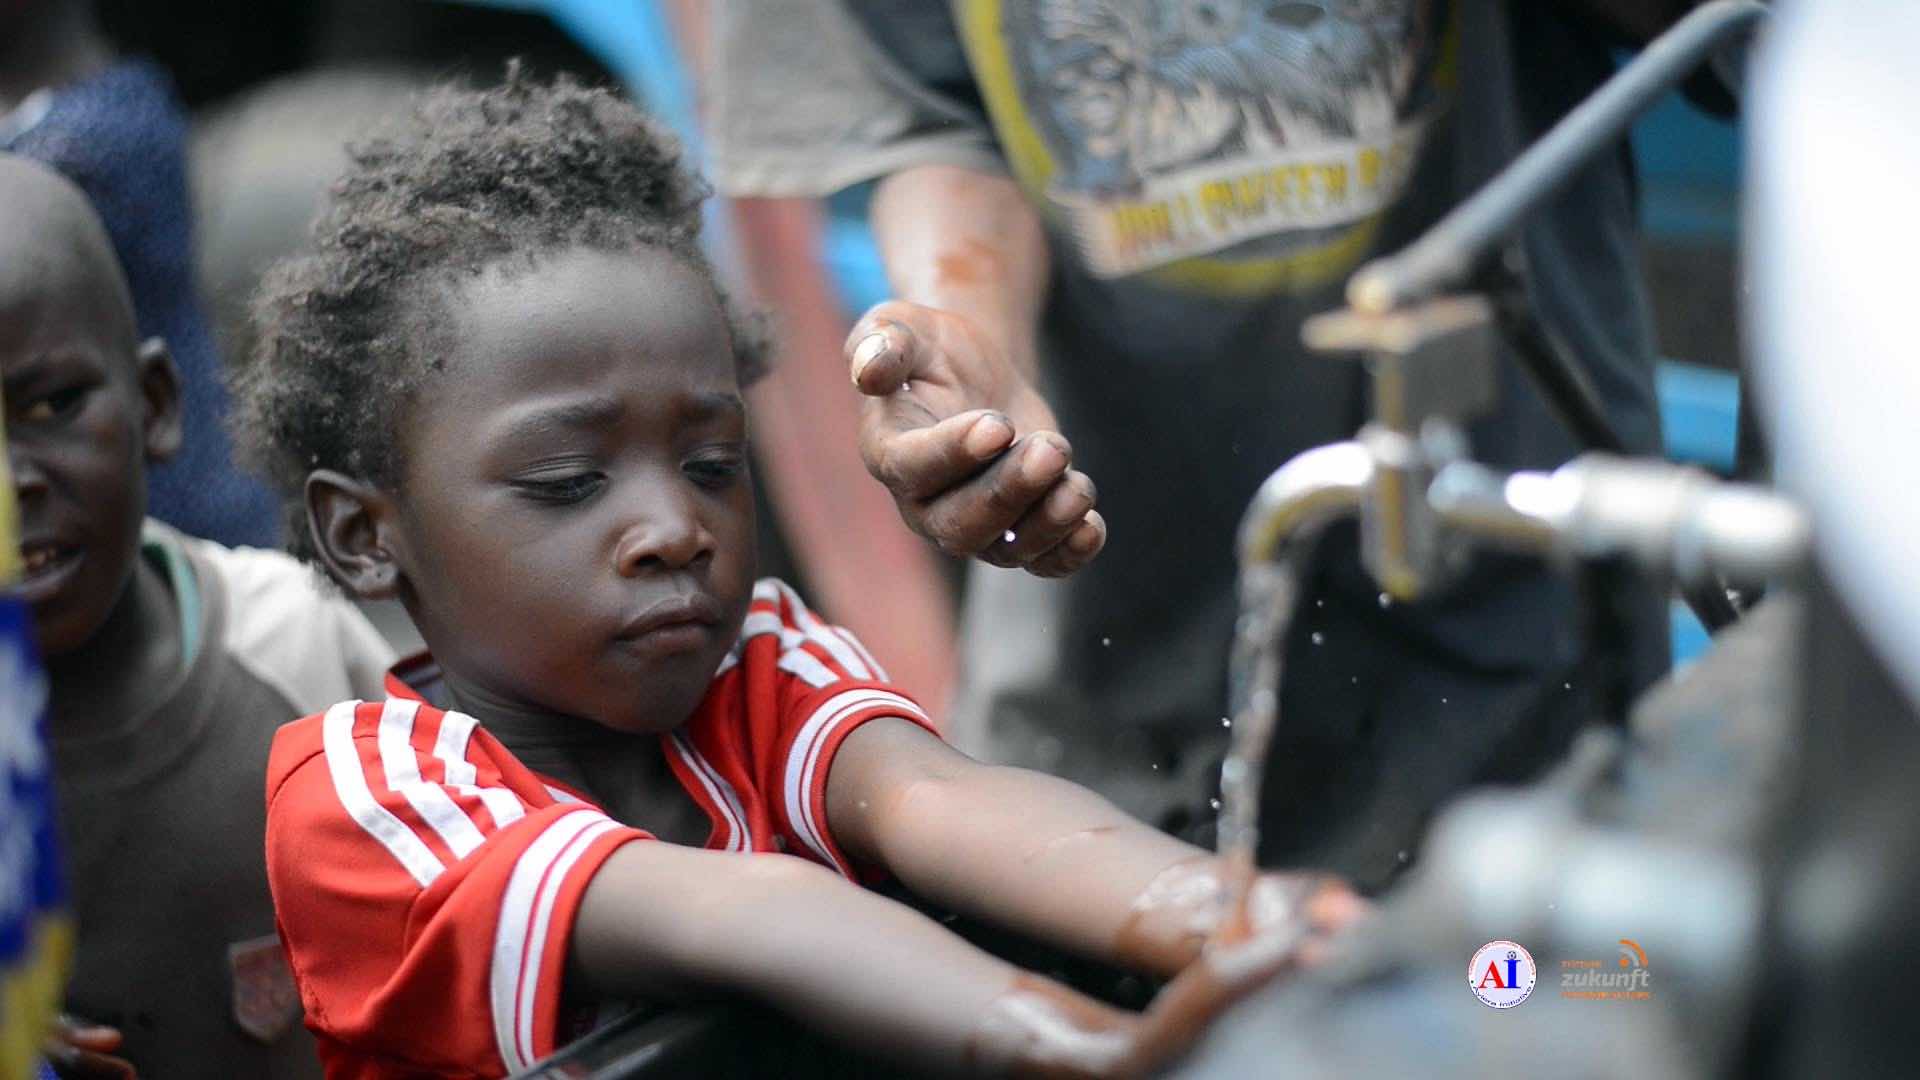 A young child could not wait to use the handsfree water stations provided by Ayiera Initiative